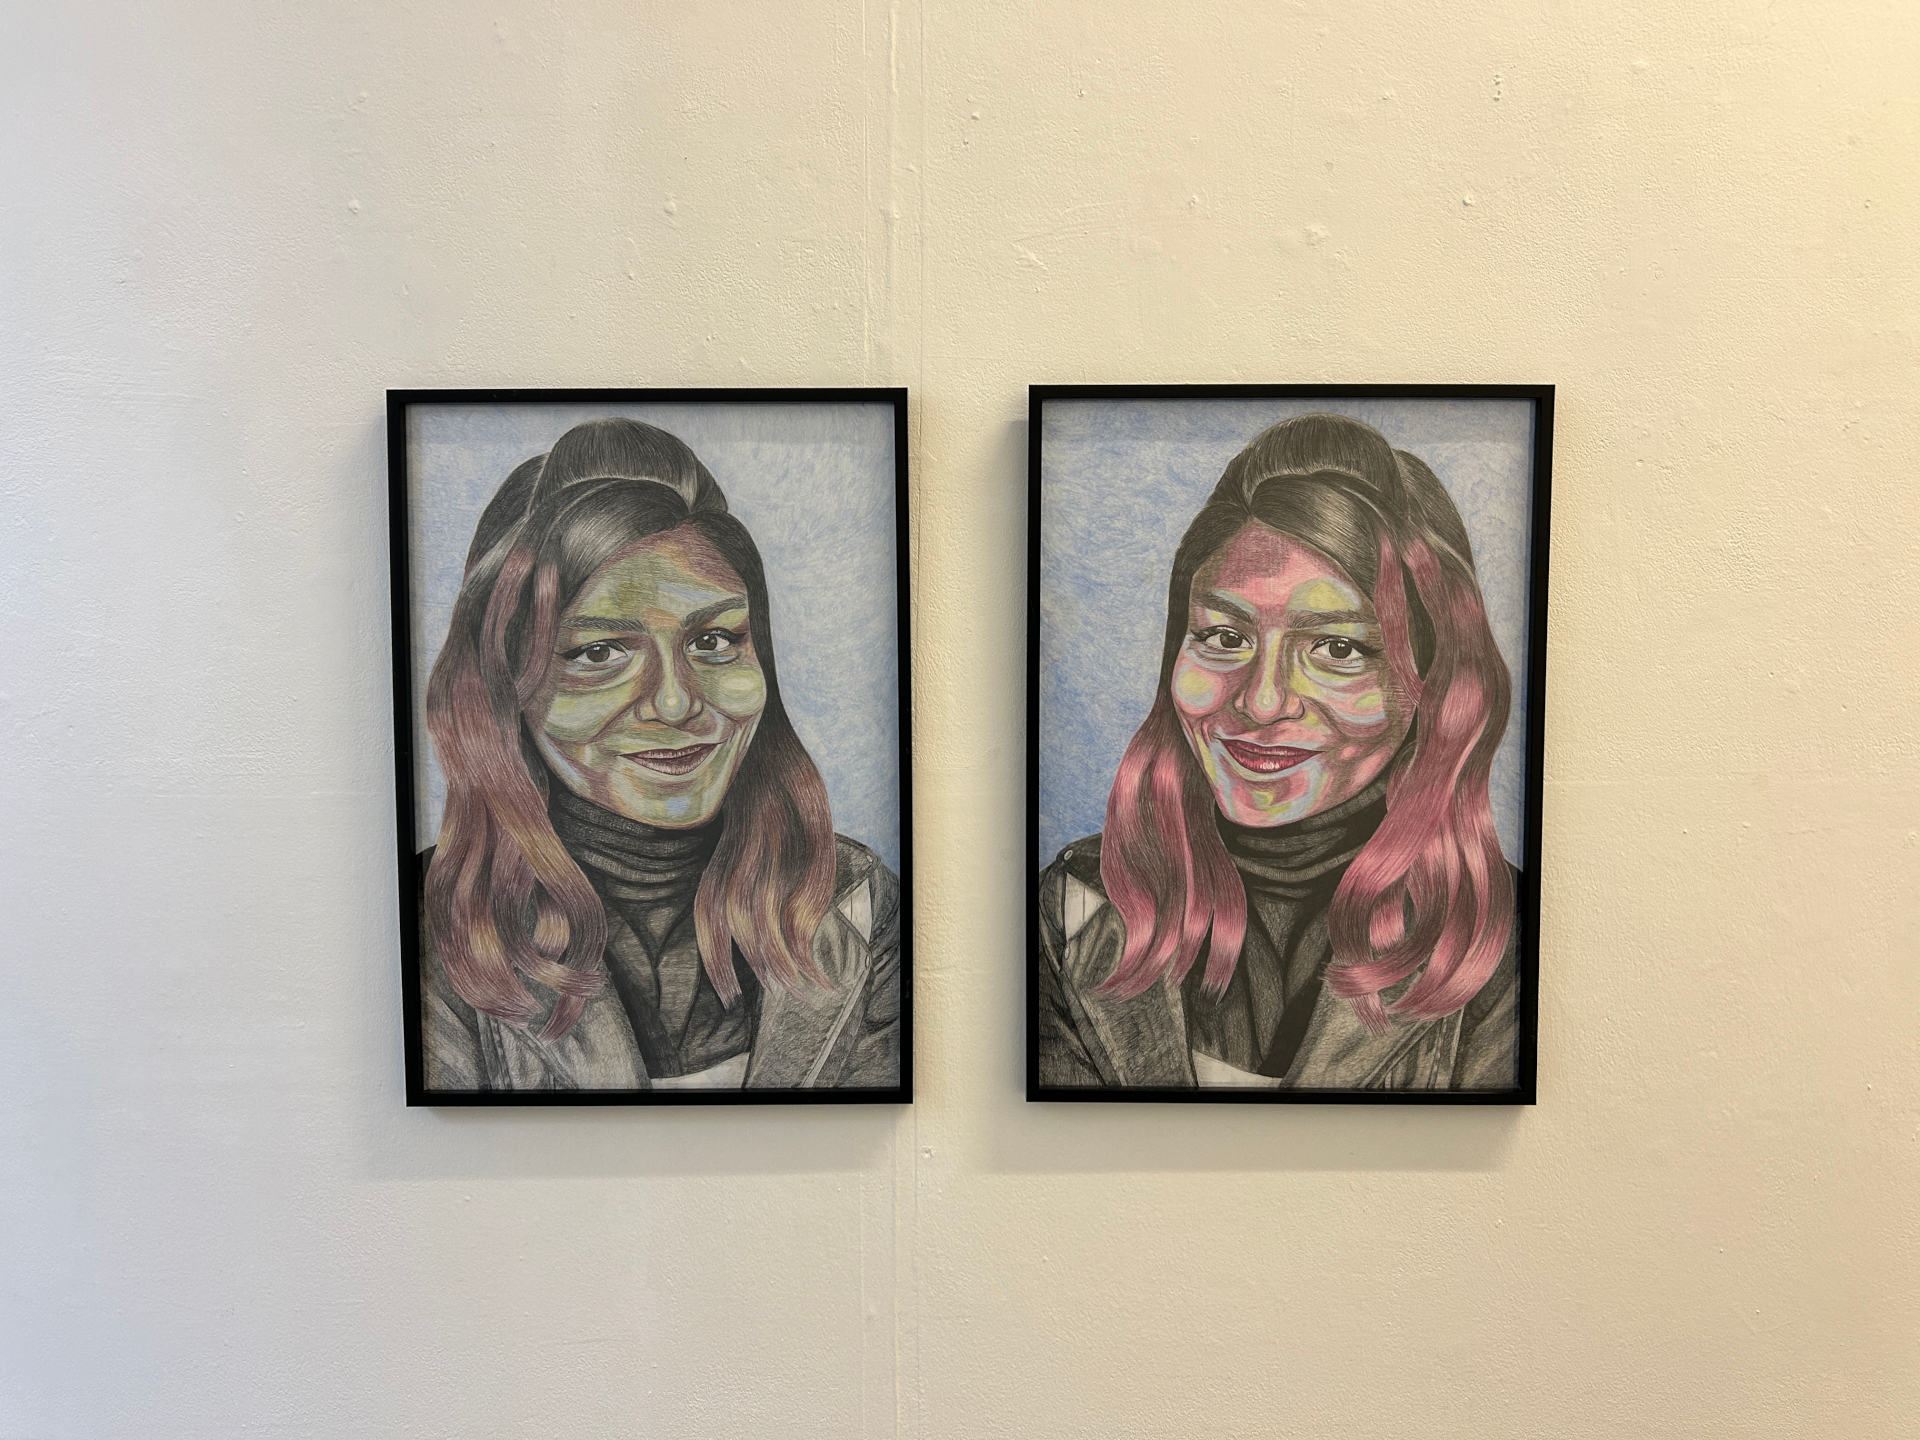 Two illustrated portraits of same woman from opposing angles